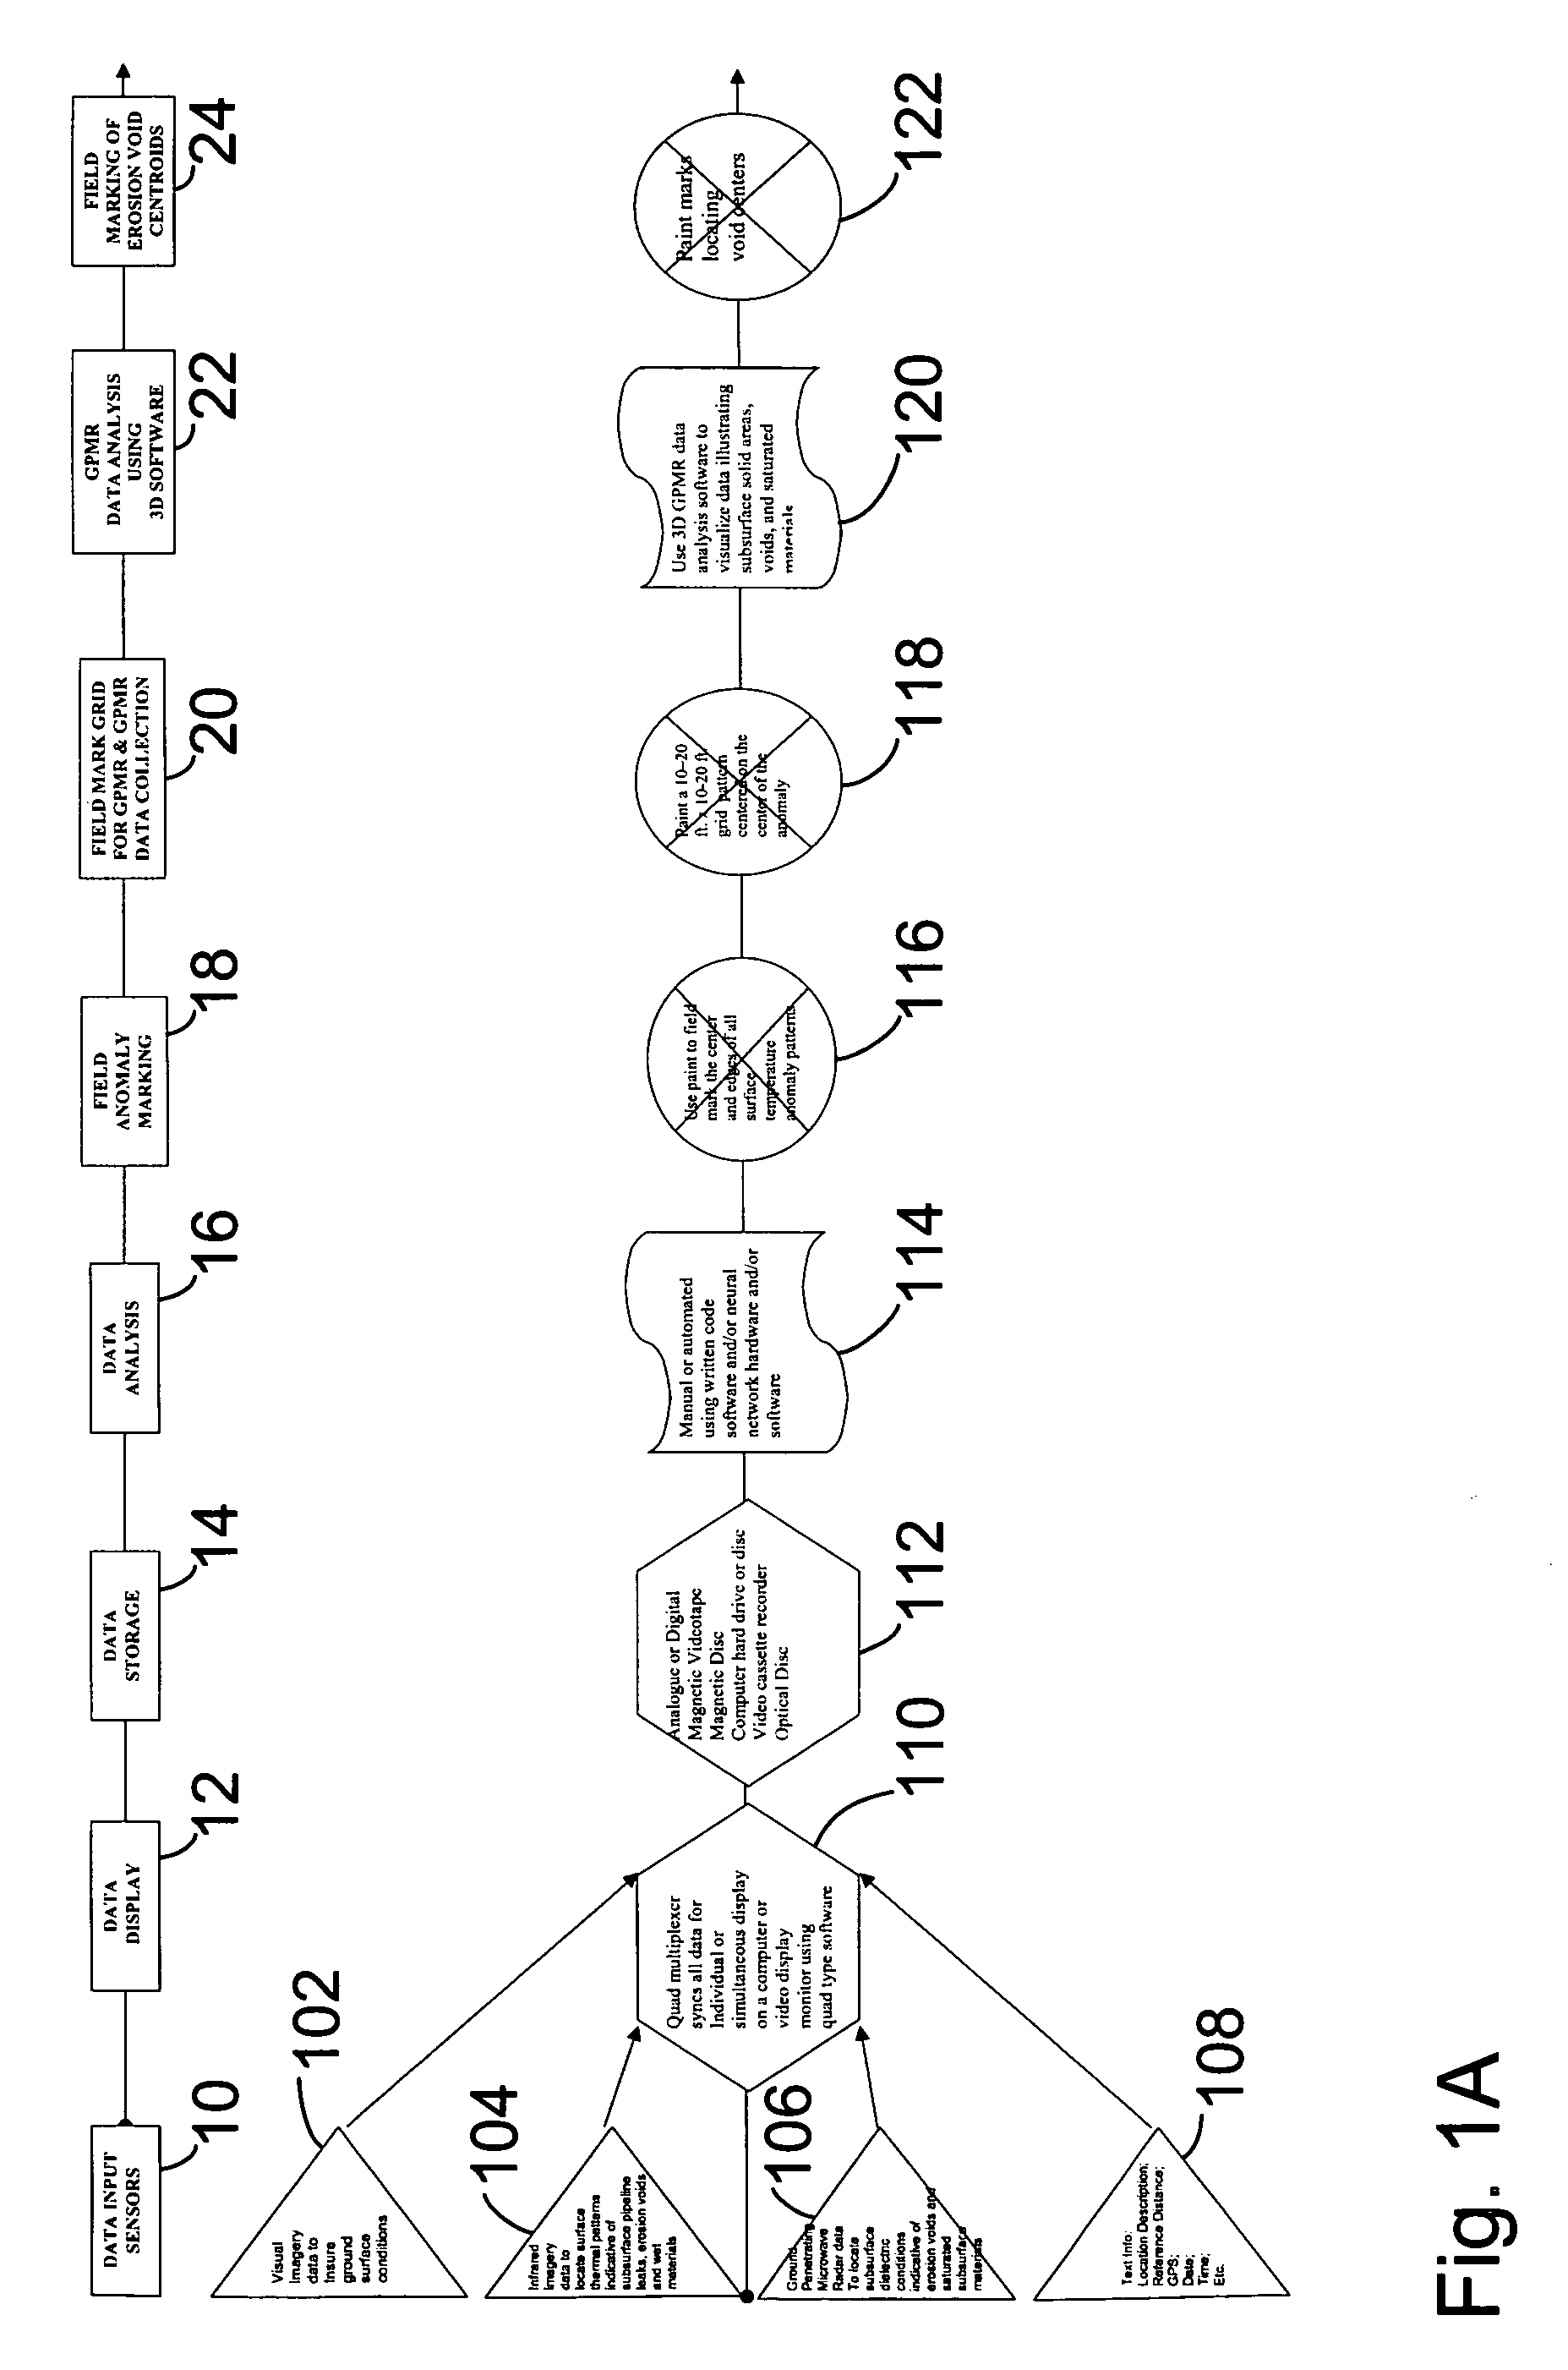 System of subterranean anomaly detection and repair using infrared thermography and ground penetrating radar